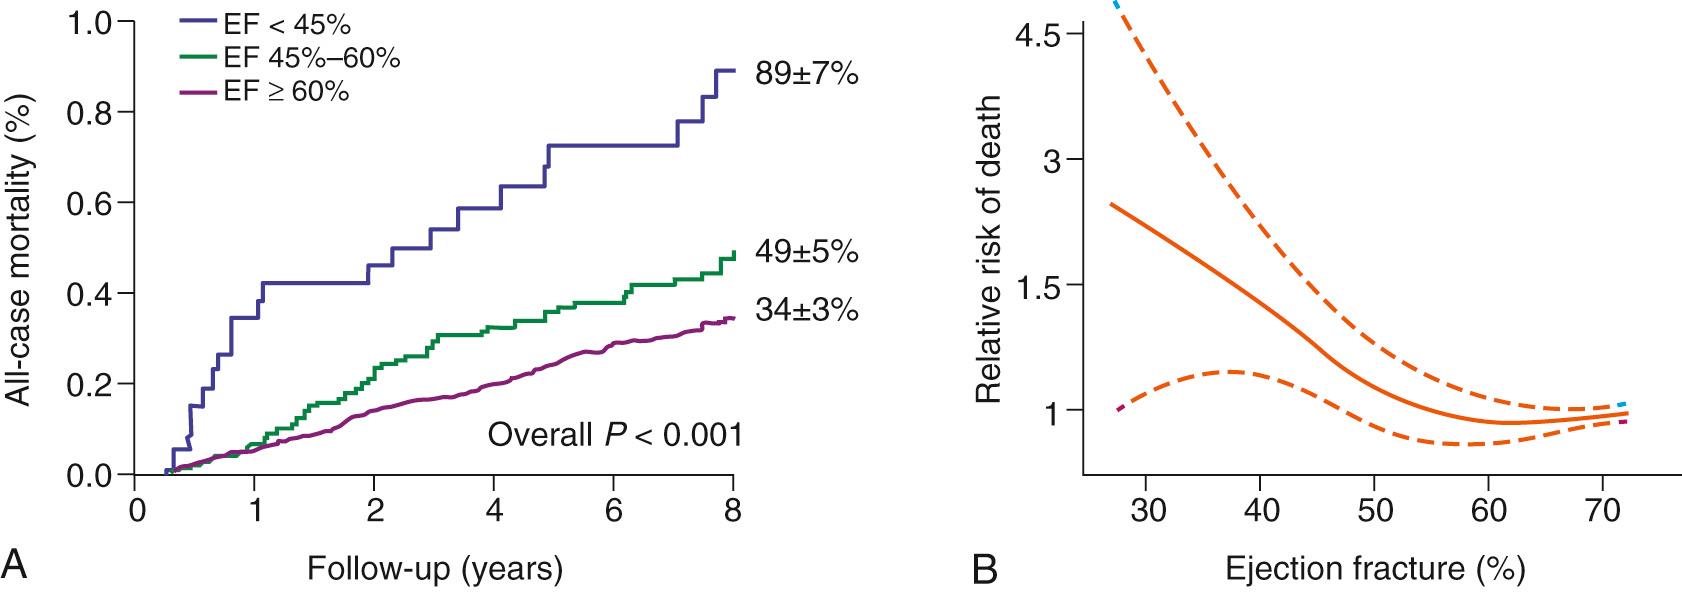 FIGURE 80-14, Impact of preoperative left ventricular dysfunction on survival under conservative management for mitral regurgitation. A, All-cause mortality stratified by ejection fraction (EF). B, Association between EF and the risk of all-cause death under conservative management. Hazard ratio (solid line) and 95% confidence intervals (dashed lines) were estimated in a Cox multivariable model with ejection fraction represented as a spline function and adjusted for sex, comorbidity index, symptoms, and coronary artery disease.